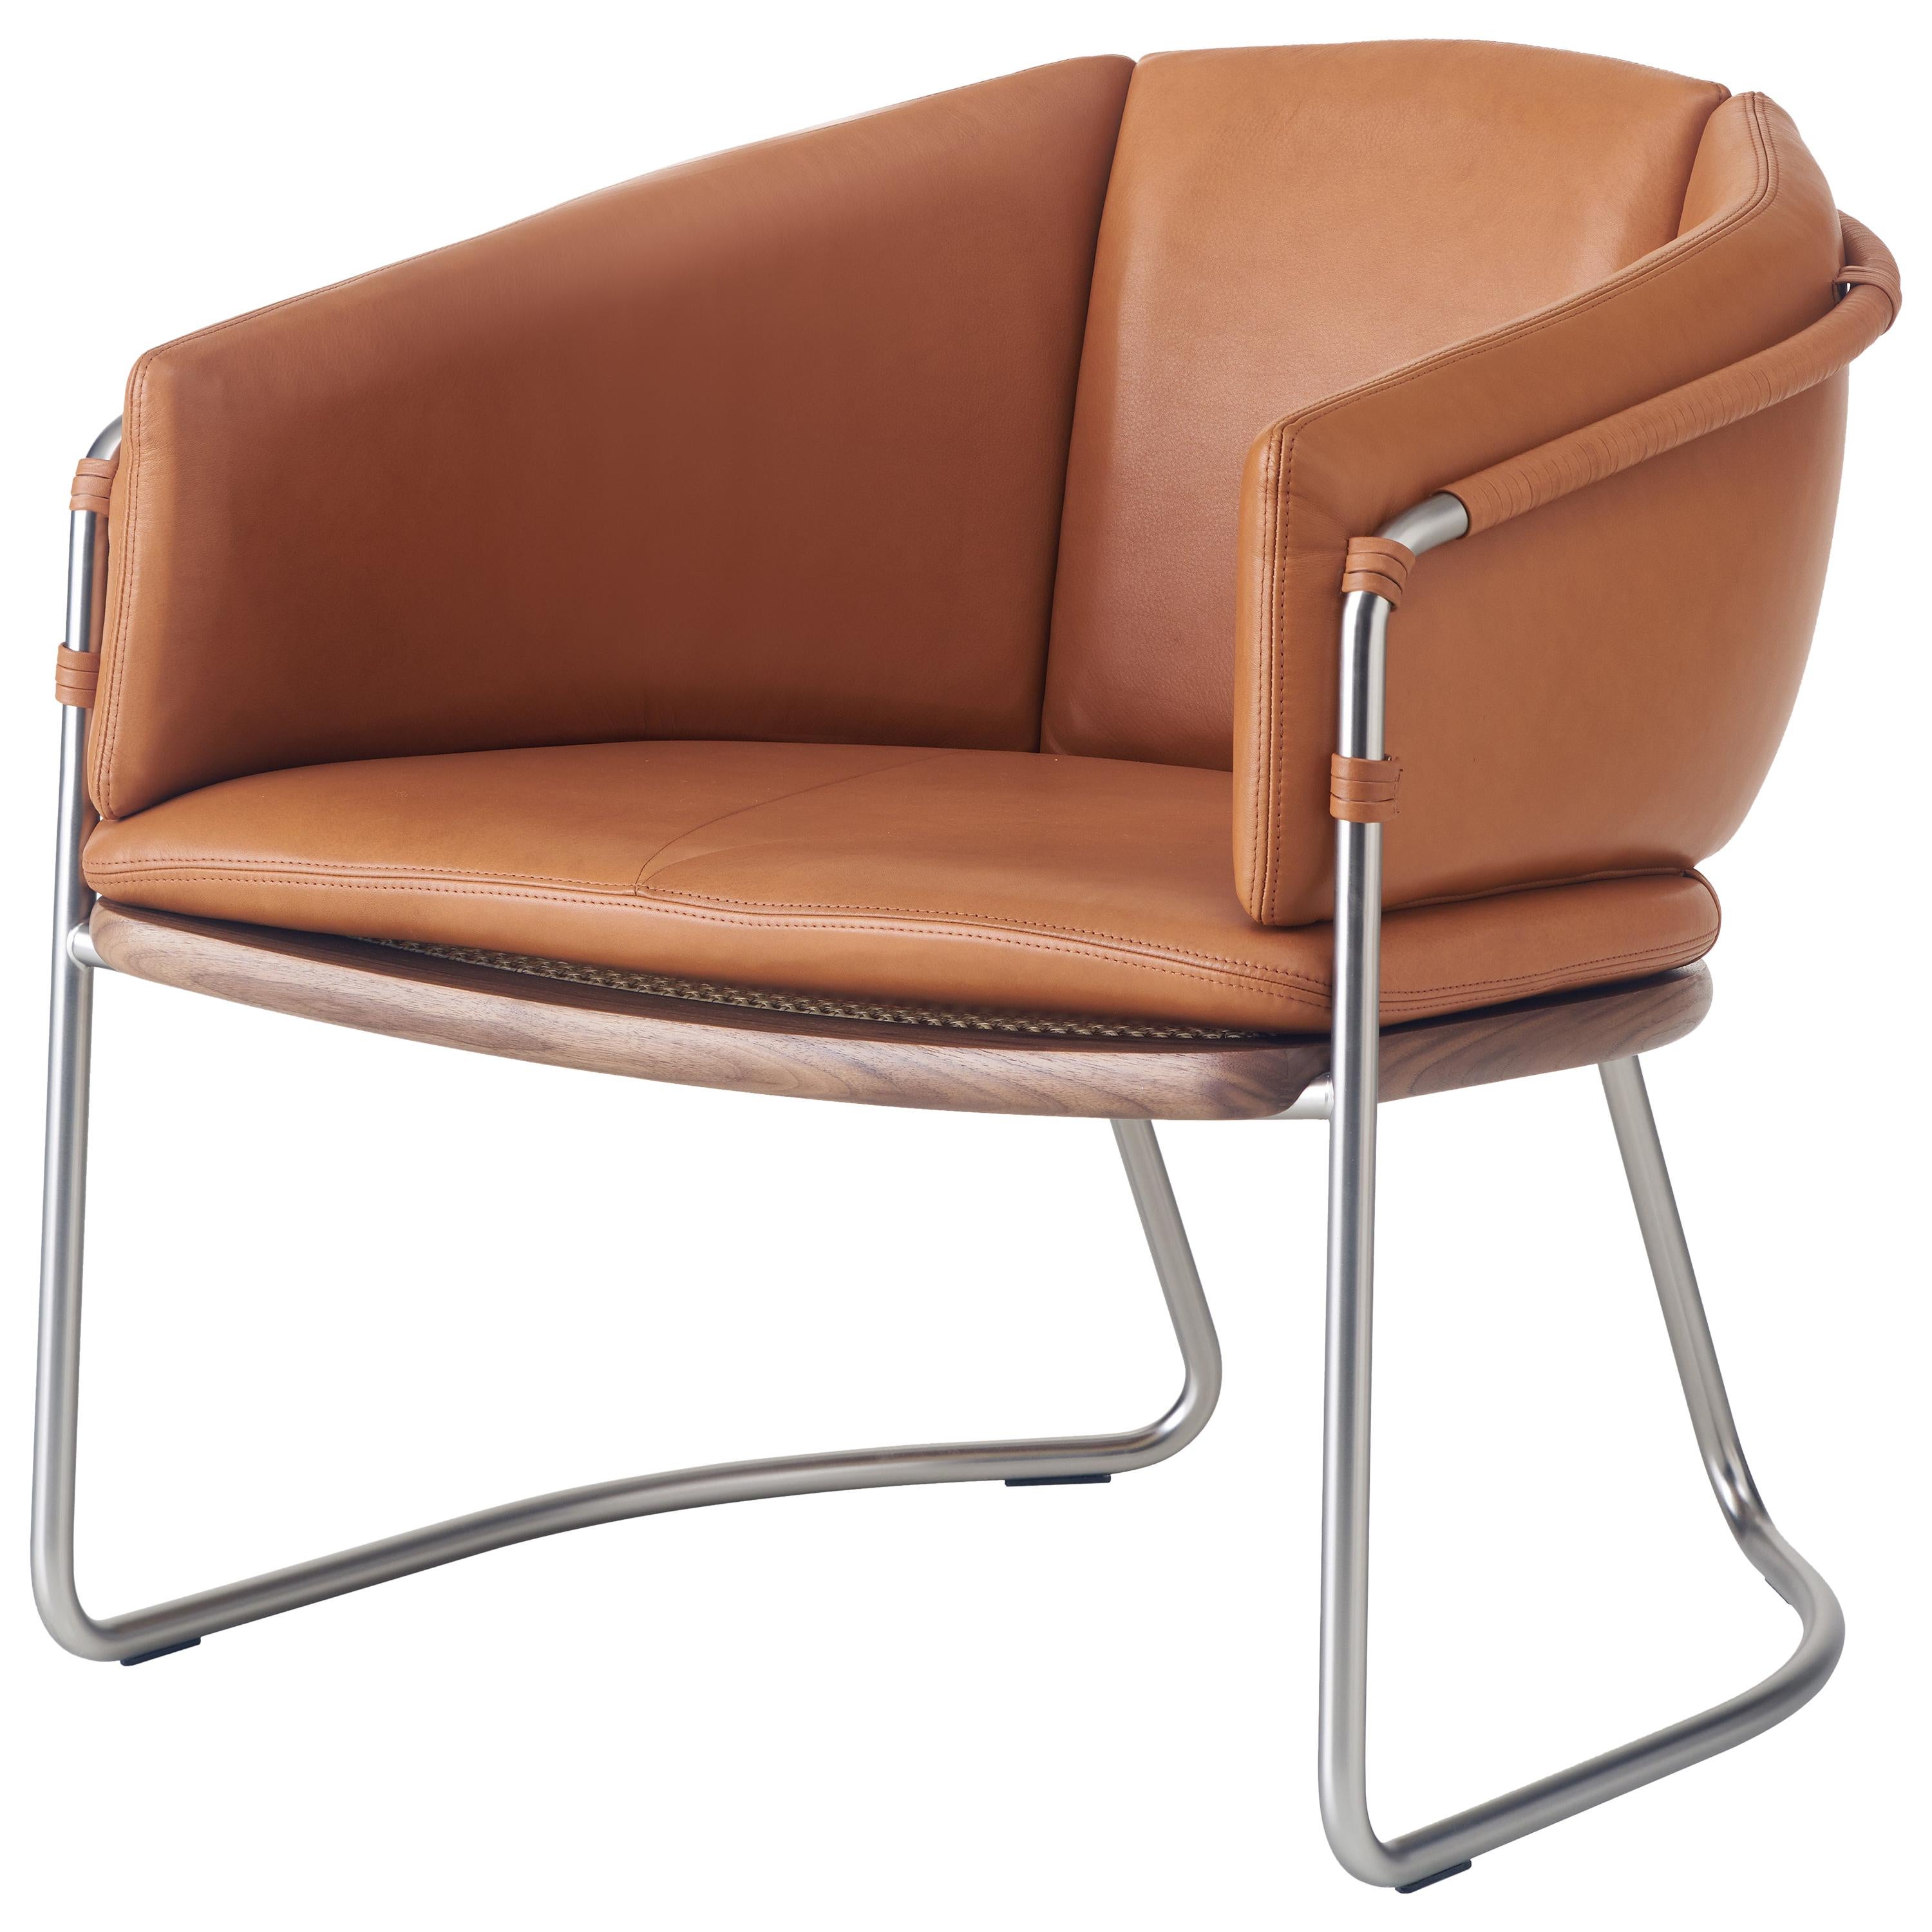 Geometric Lounge Chair in Walnut, Satin Nickel and Leather by Craig Bassam